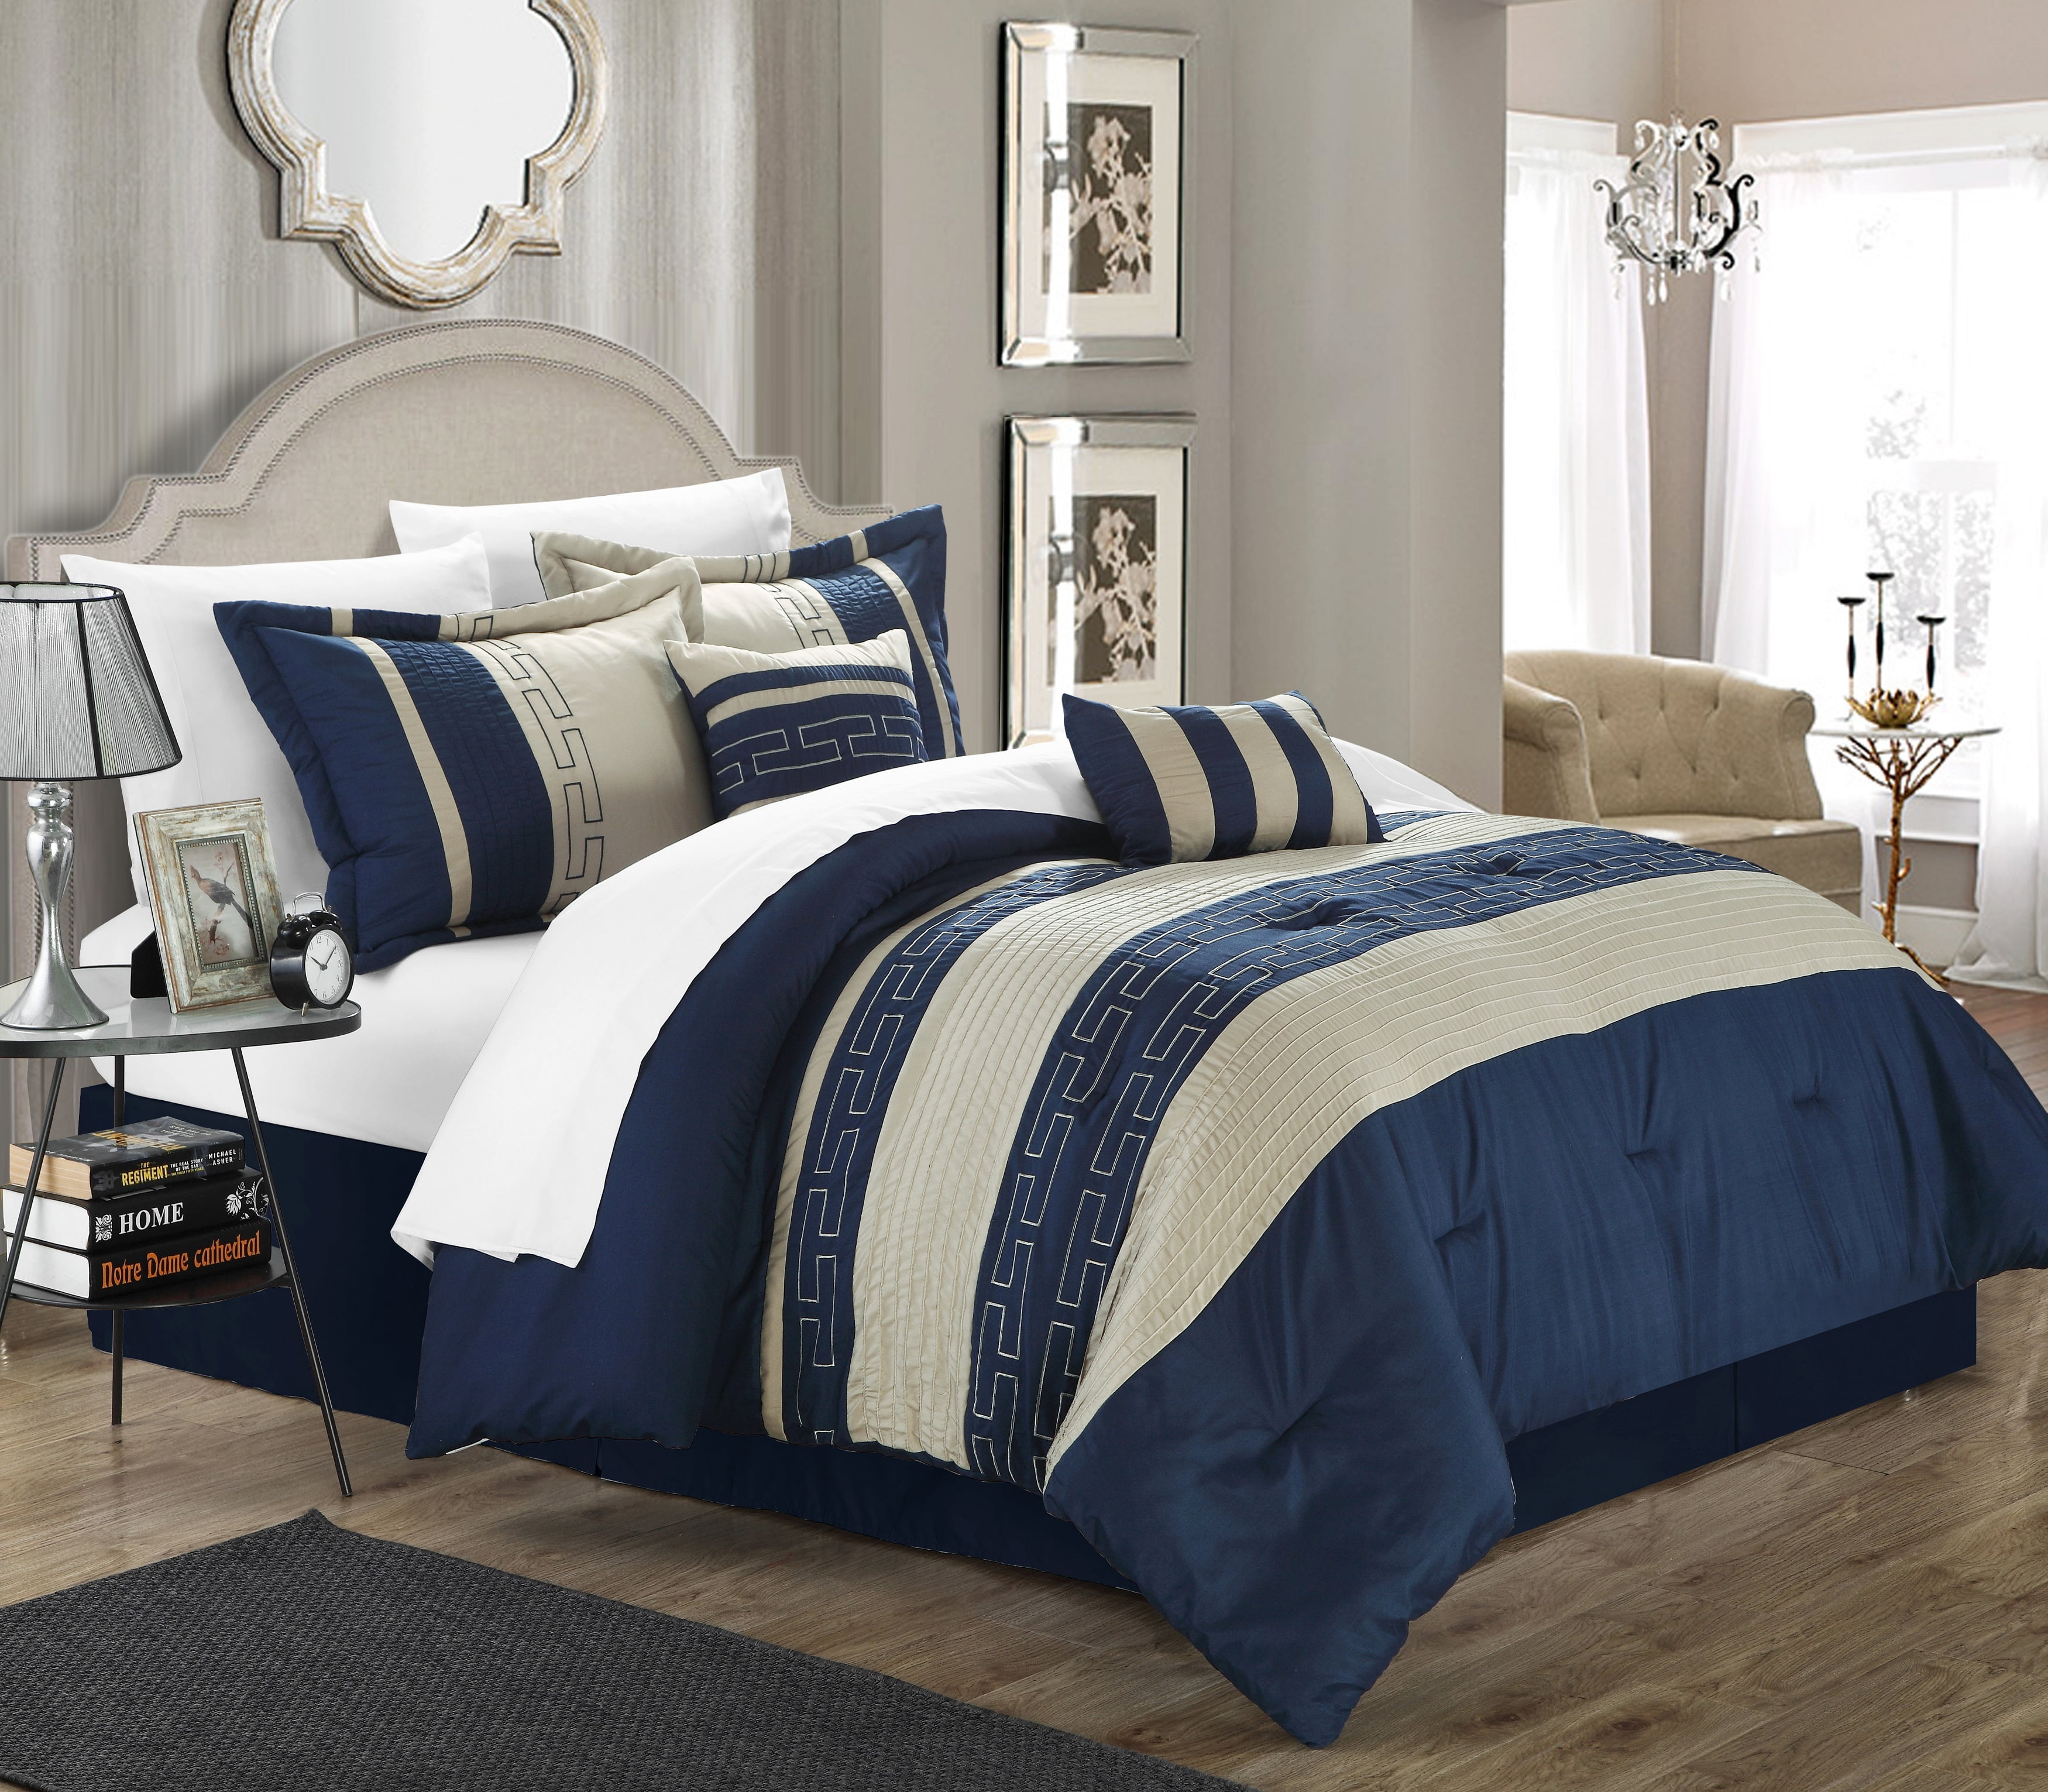 travel bedding set for adults